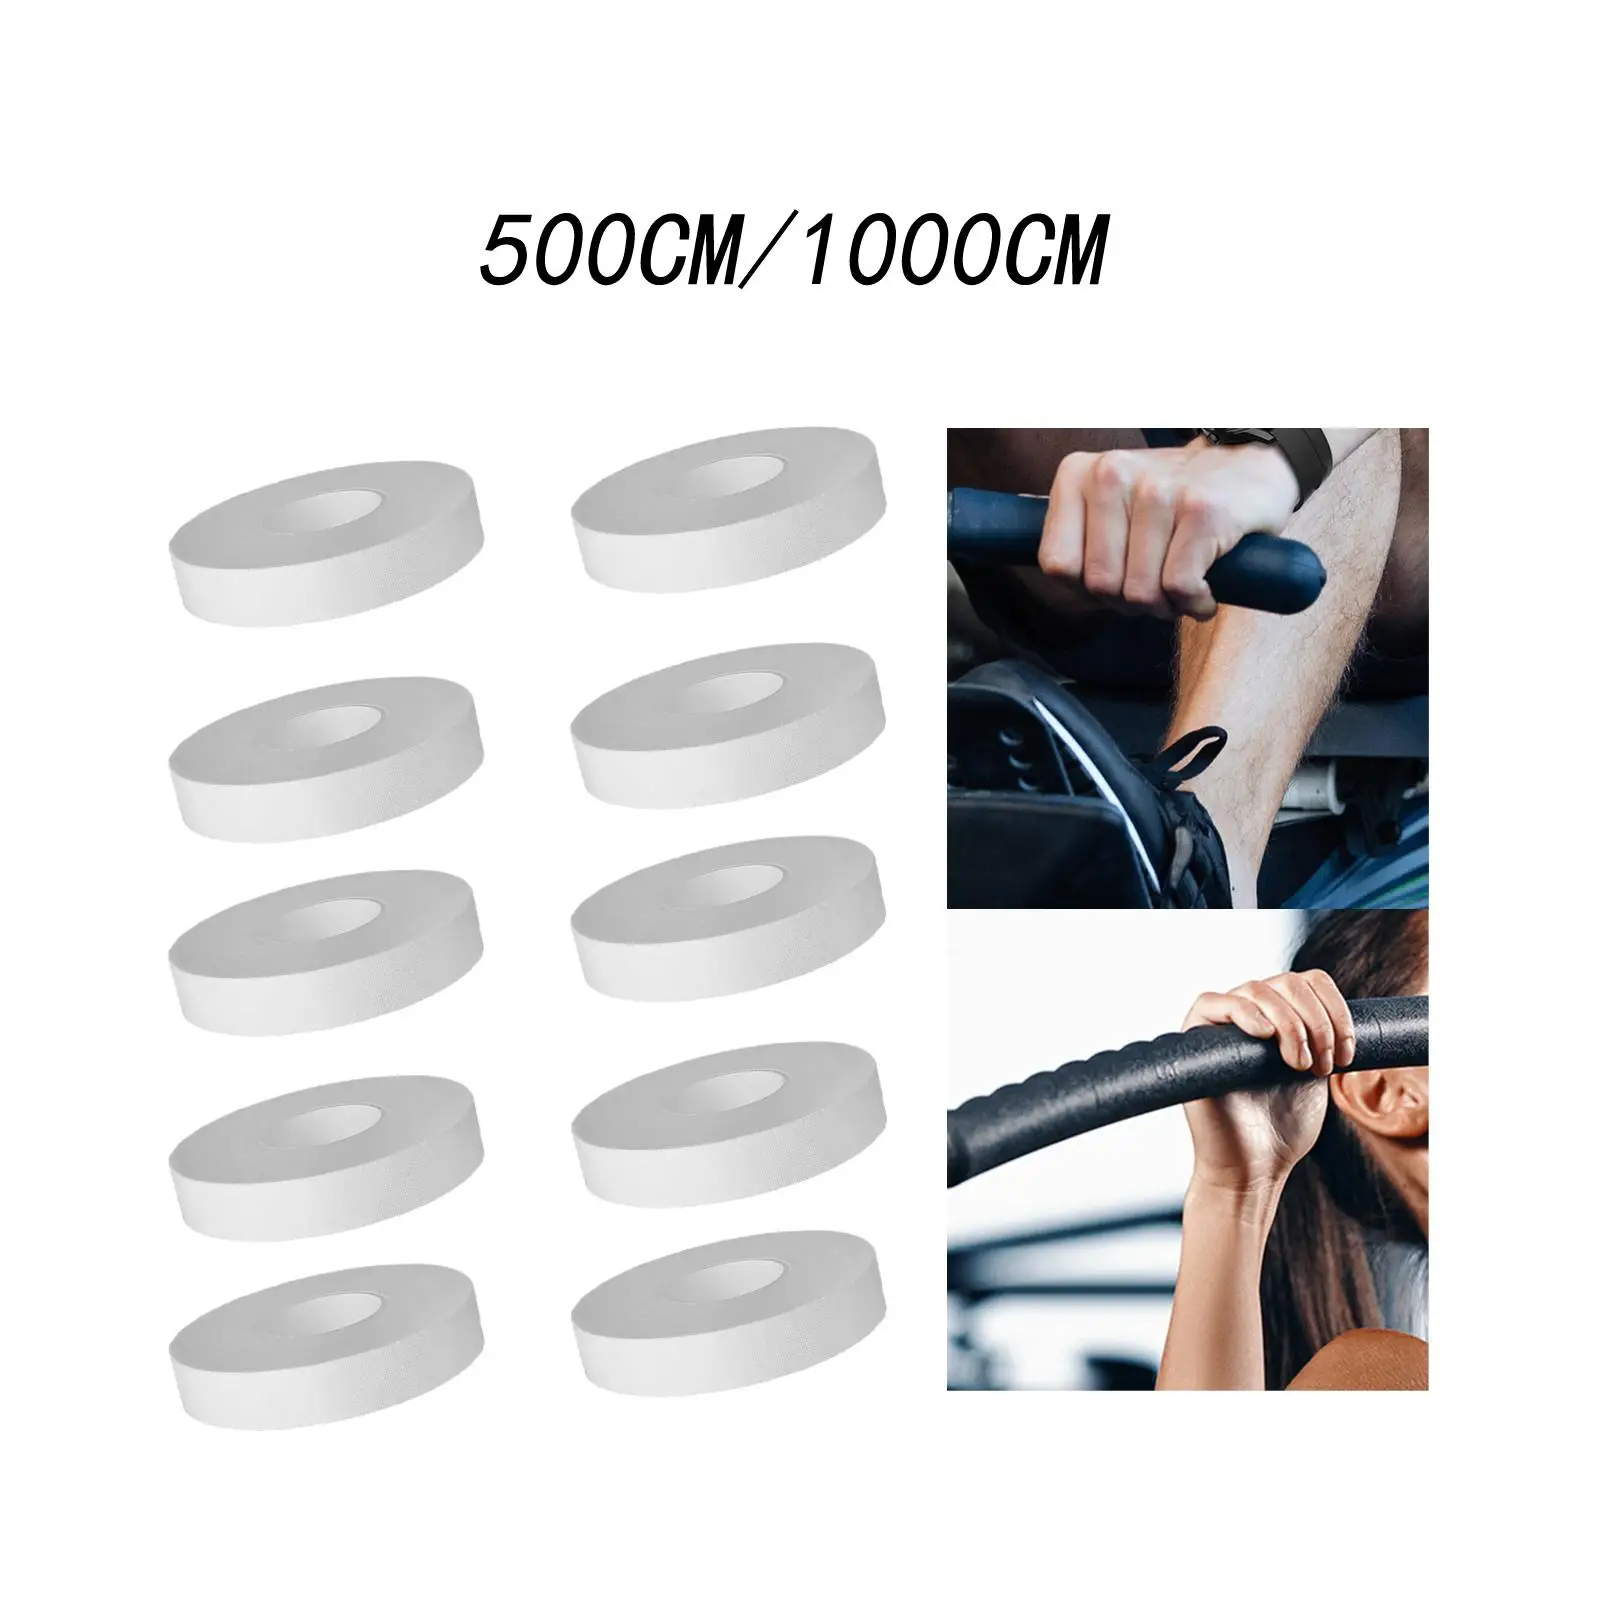 10 Pieces Athletic Finger Tapes Comfortable Elastic Protector Durable Gym Outdoor Sports for Toe Wrist Students Family Athletics